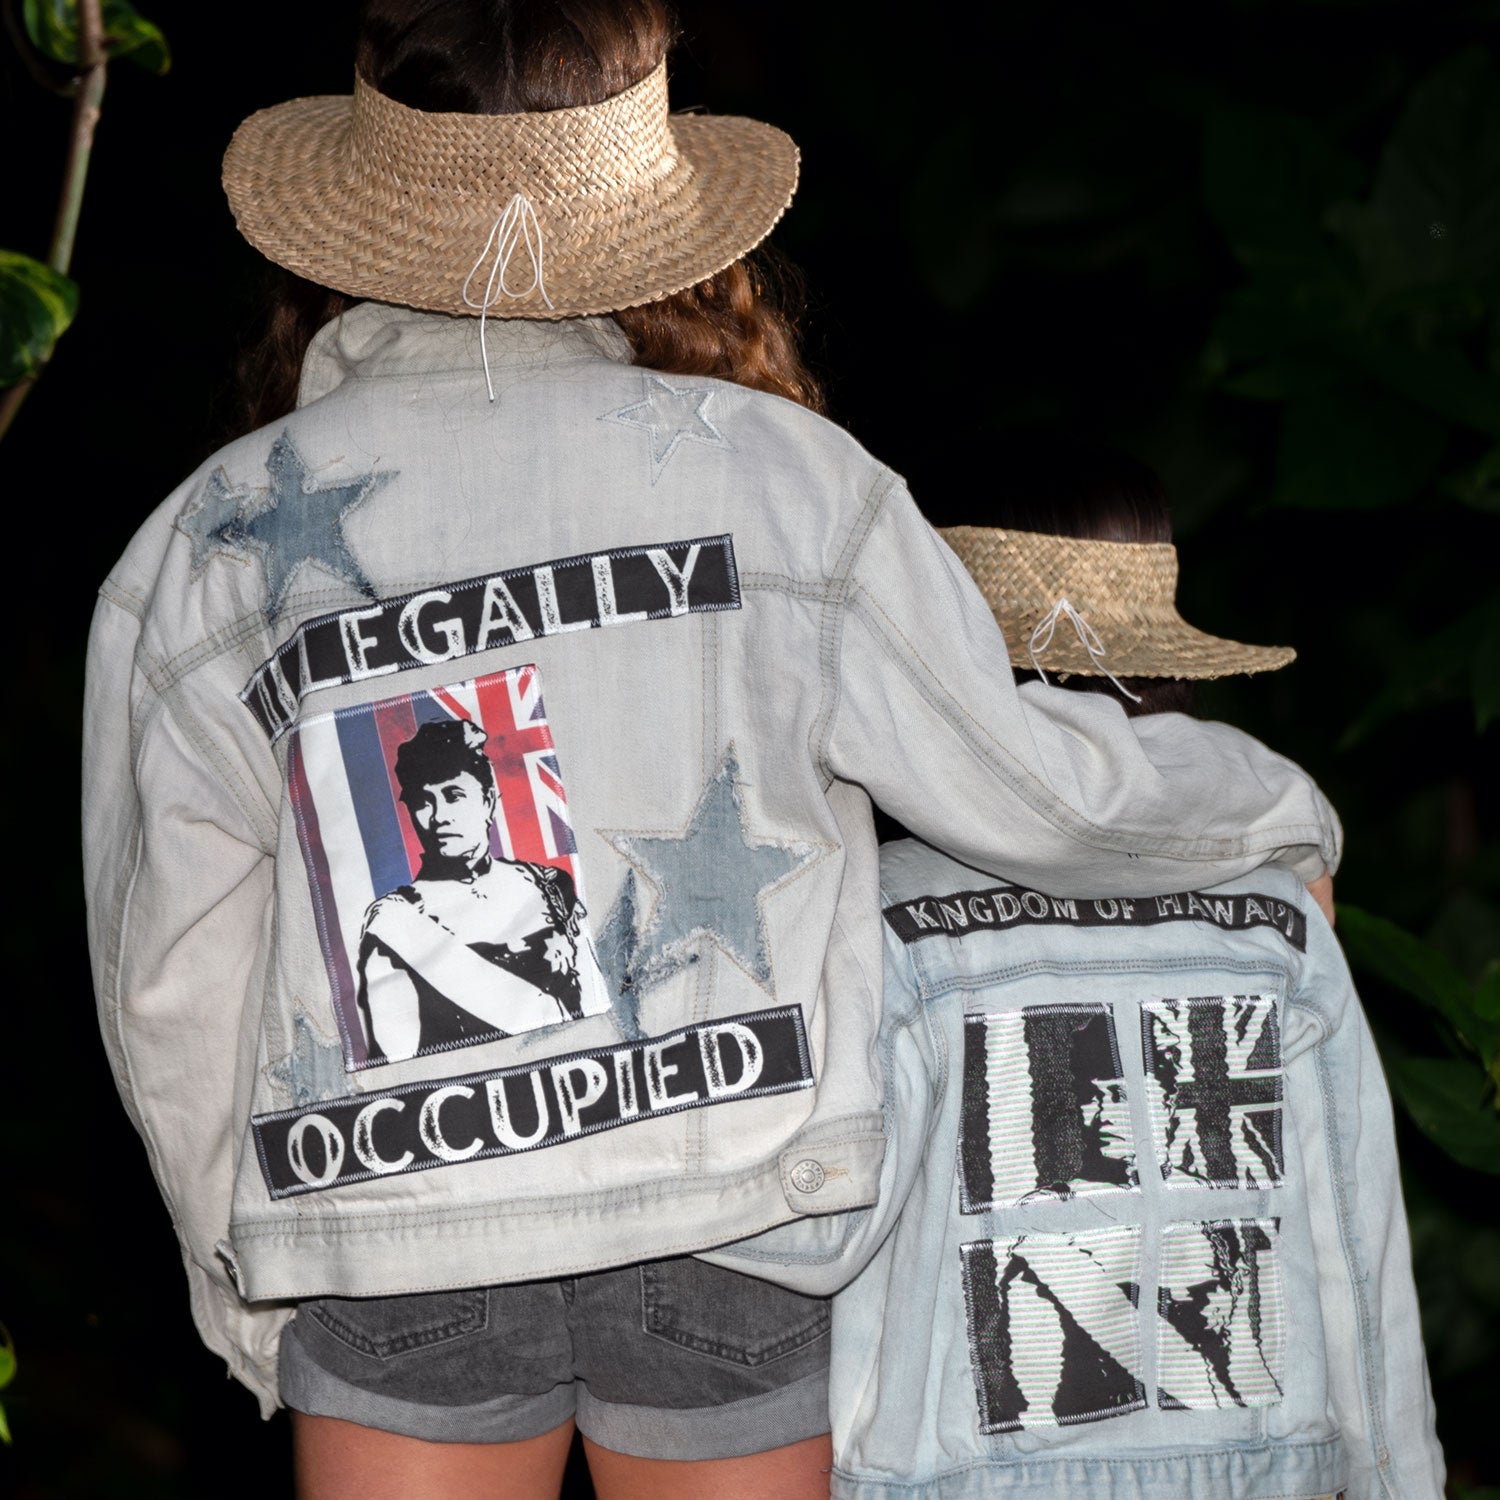 Illegally Occupied Distressed Denim Jean Jacket Women's - Small